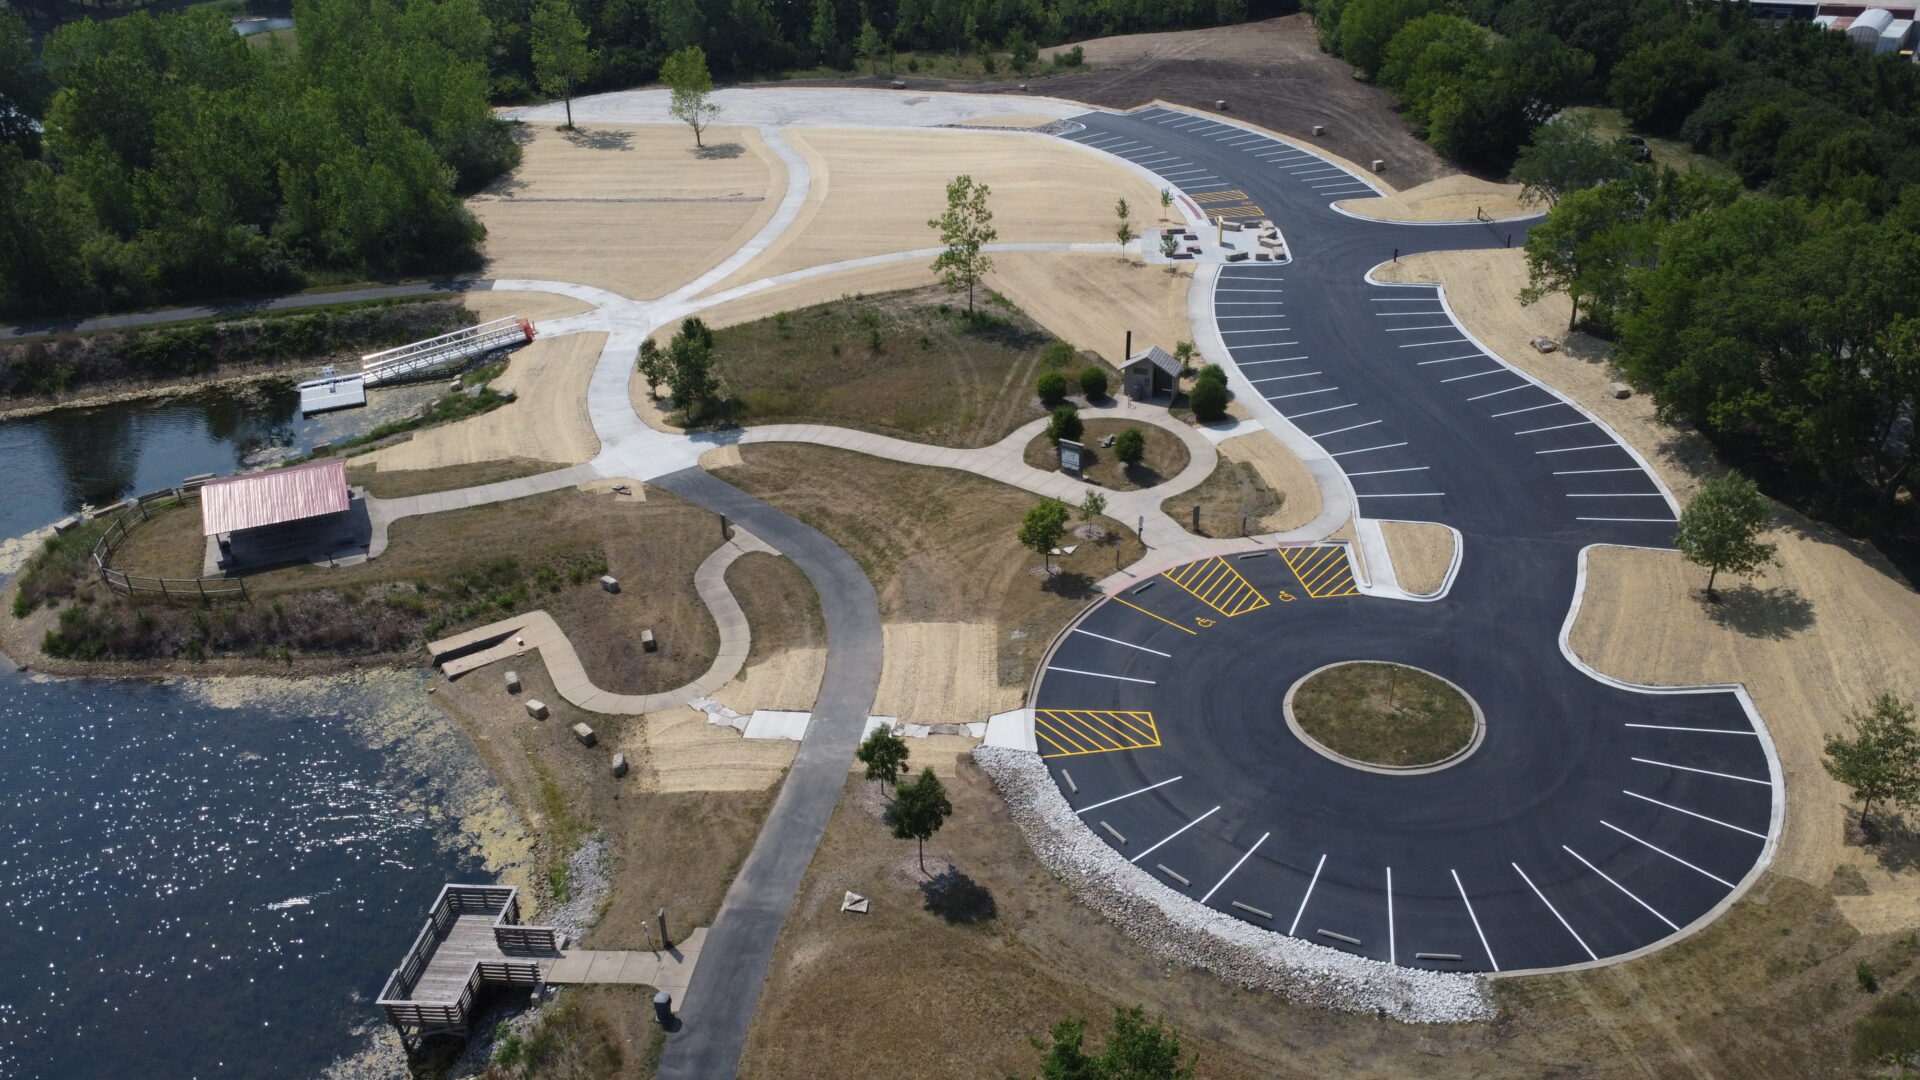 Aerial view of scenic park with roads and parking lot.